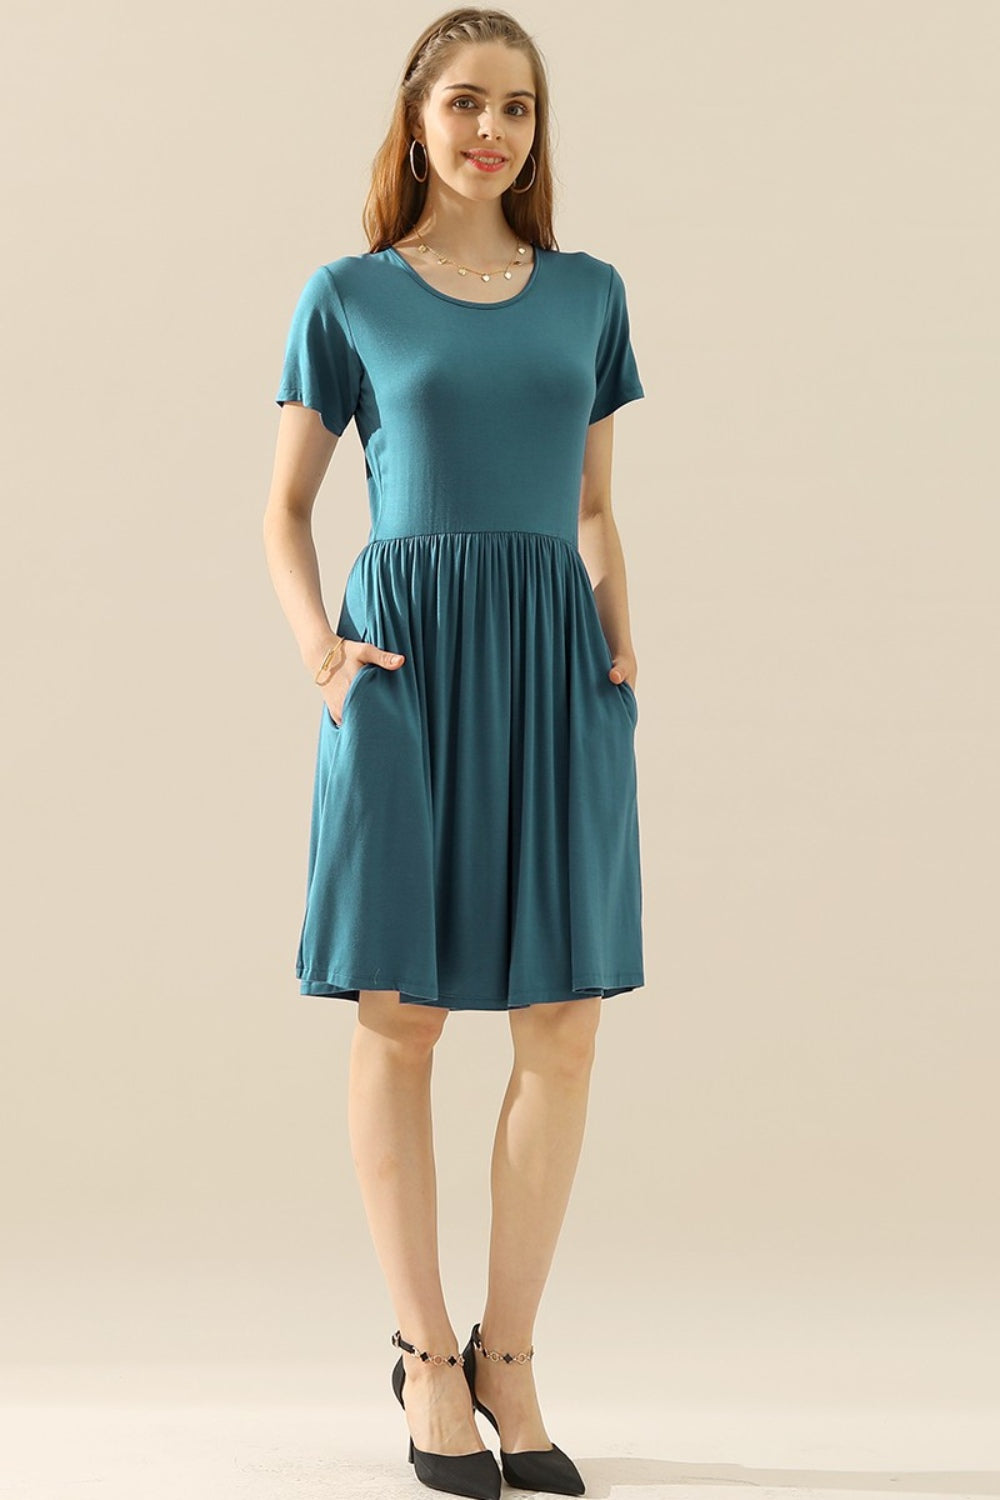 Ninexis Full Size Round Neck Ruched Dress with Pockets - TEAL / S - DRESSES - Mixed